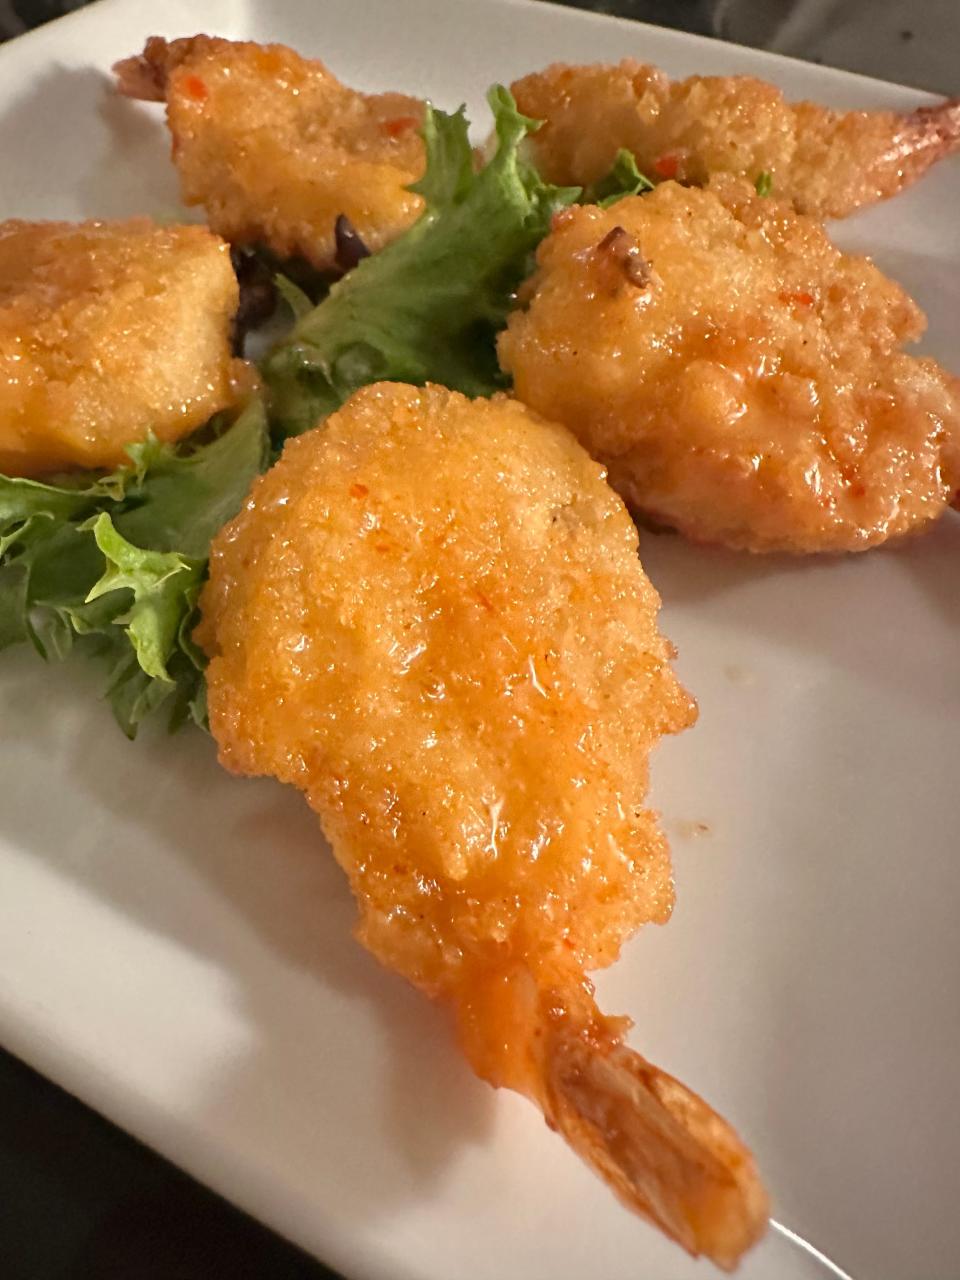 Generously sized and perfectly cooked breaded shrimp were part of my surf n' turf special at Tozzi's Restaurant of Magnolia.